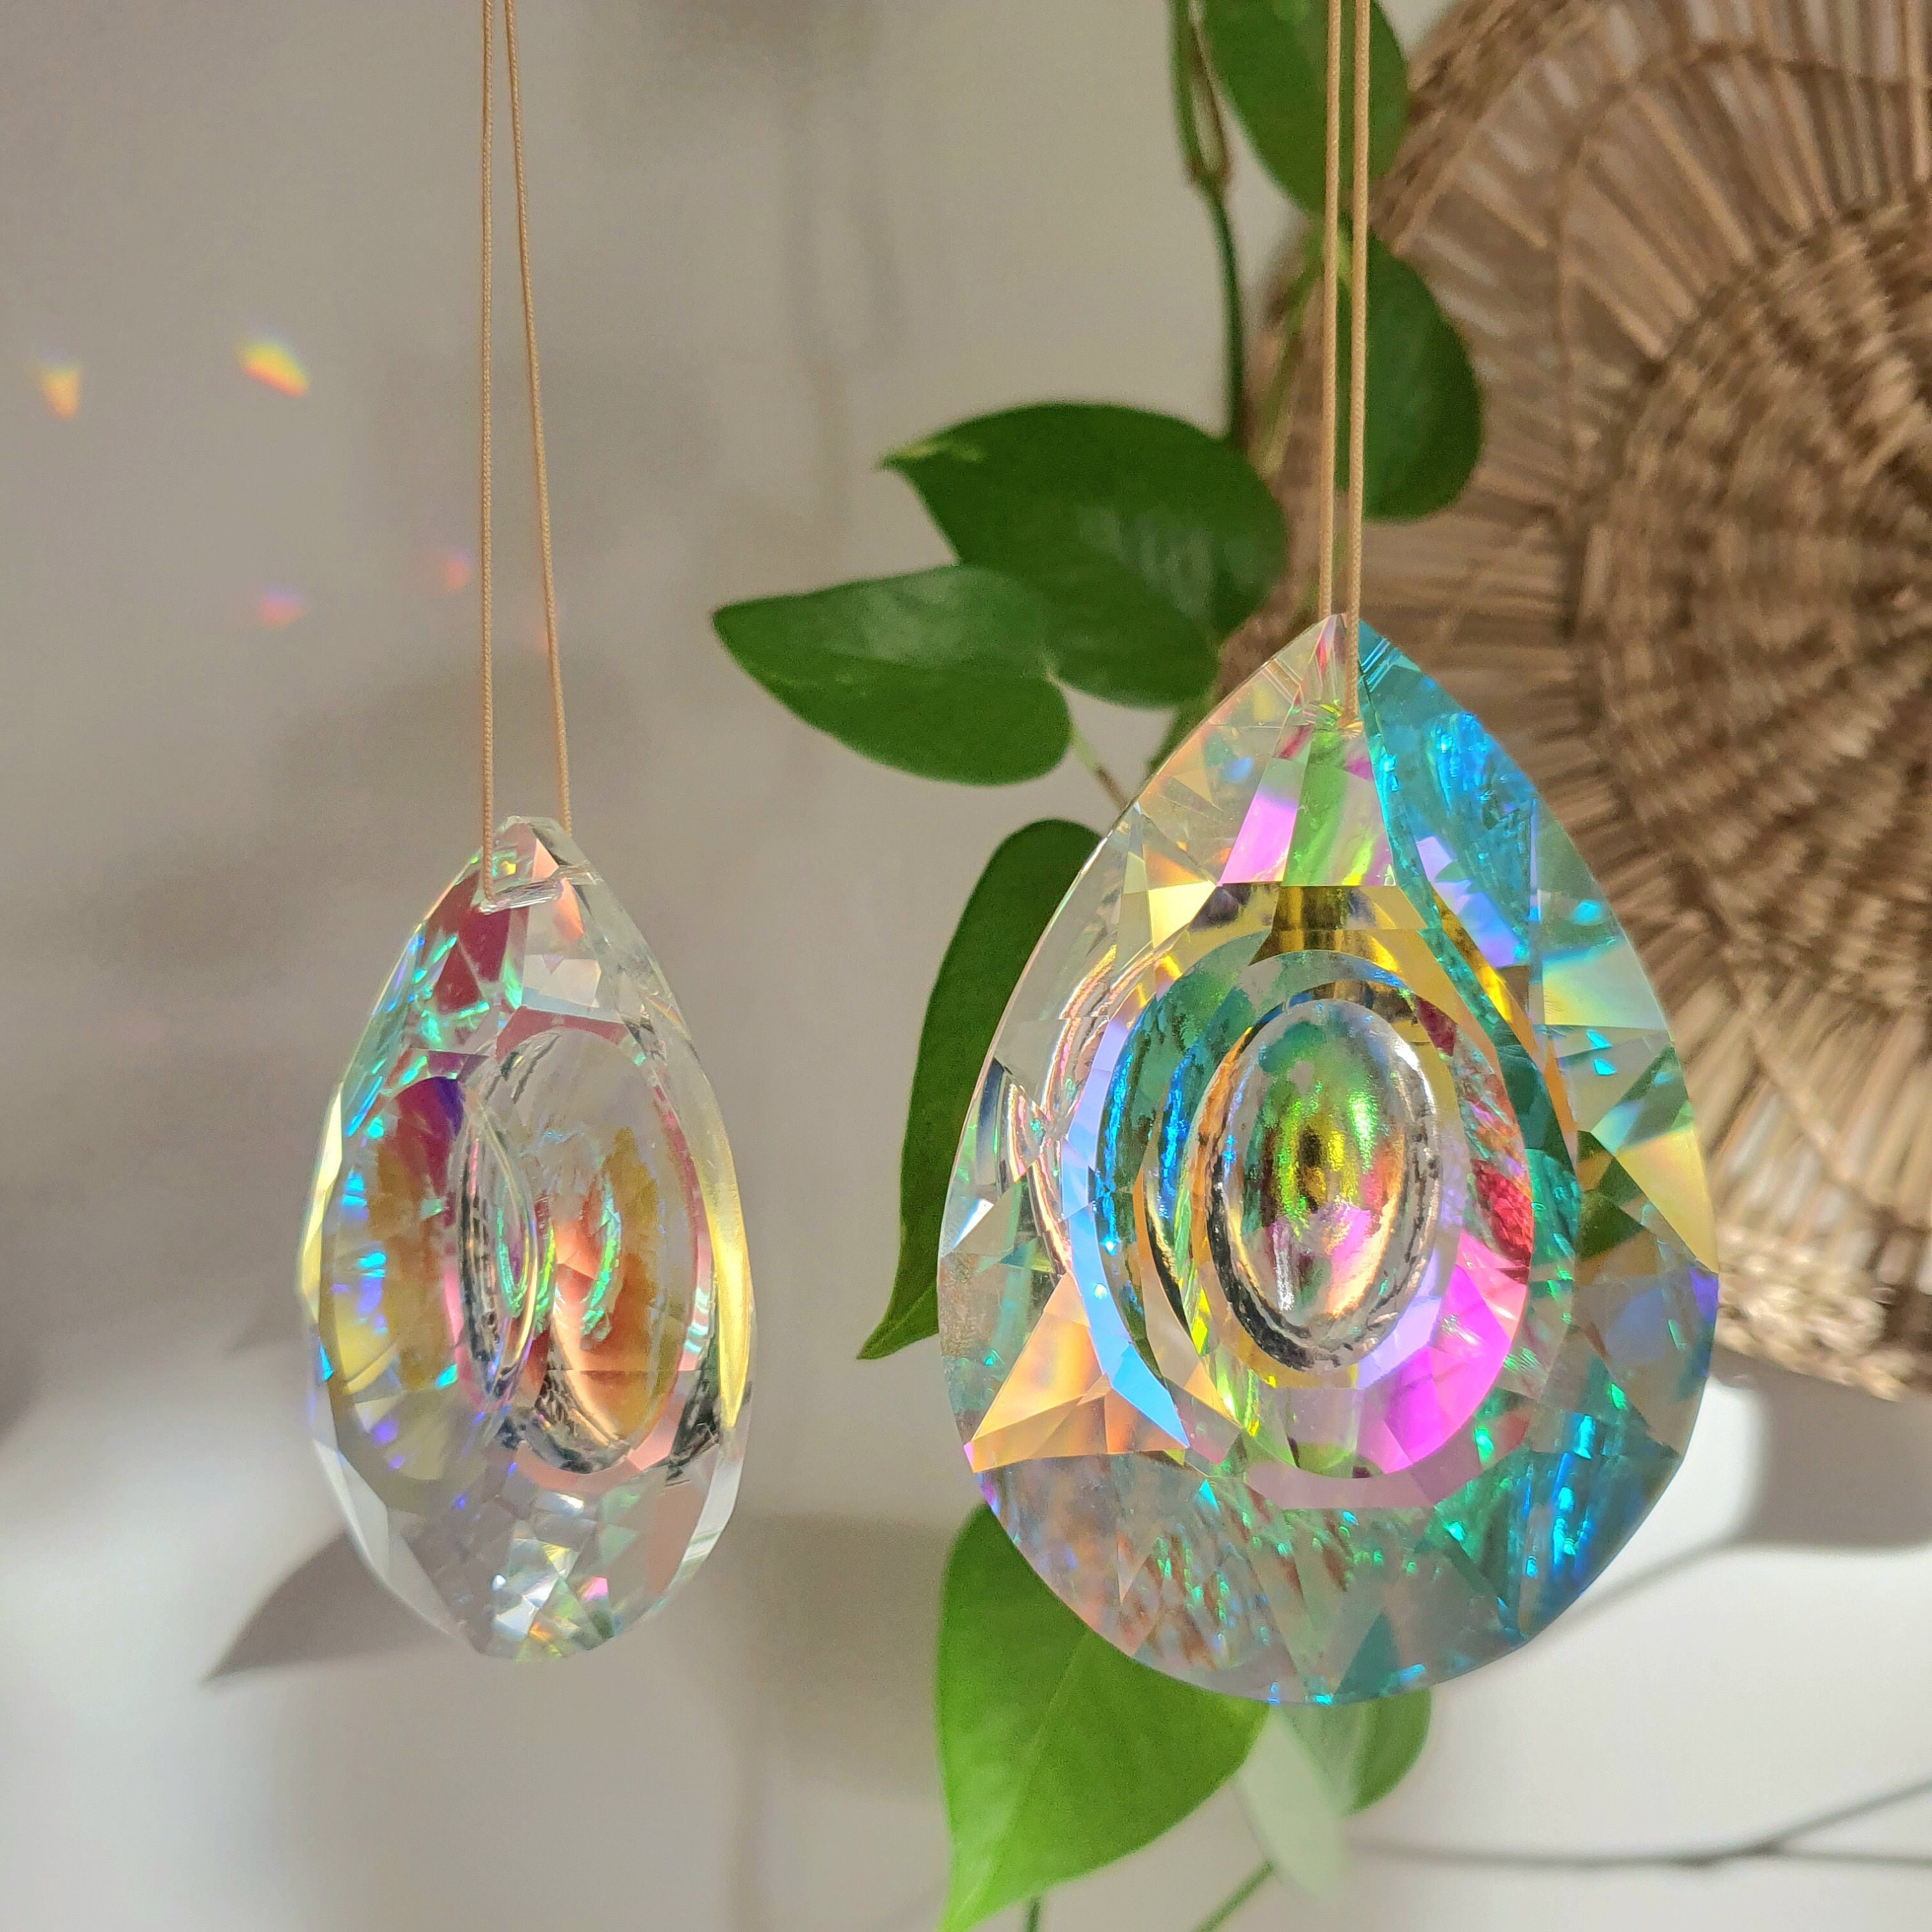 Feng Shui Crystal Round and Flat Shape of 60 Mm Feng Shui Mobile Suncatcher  